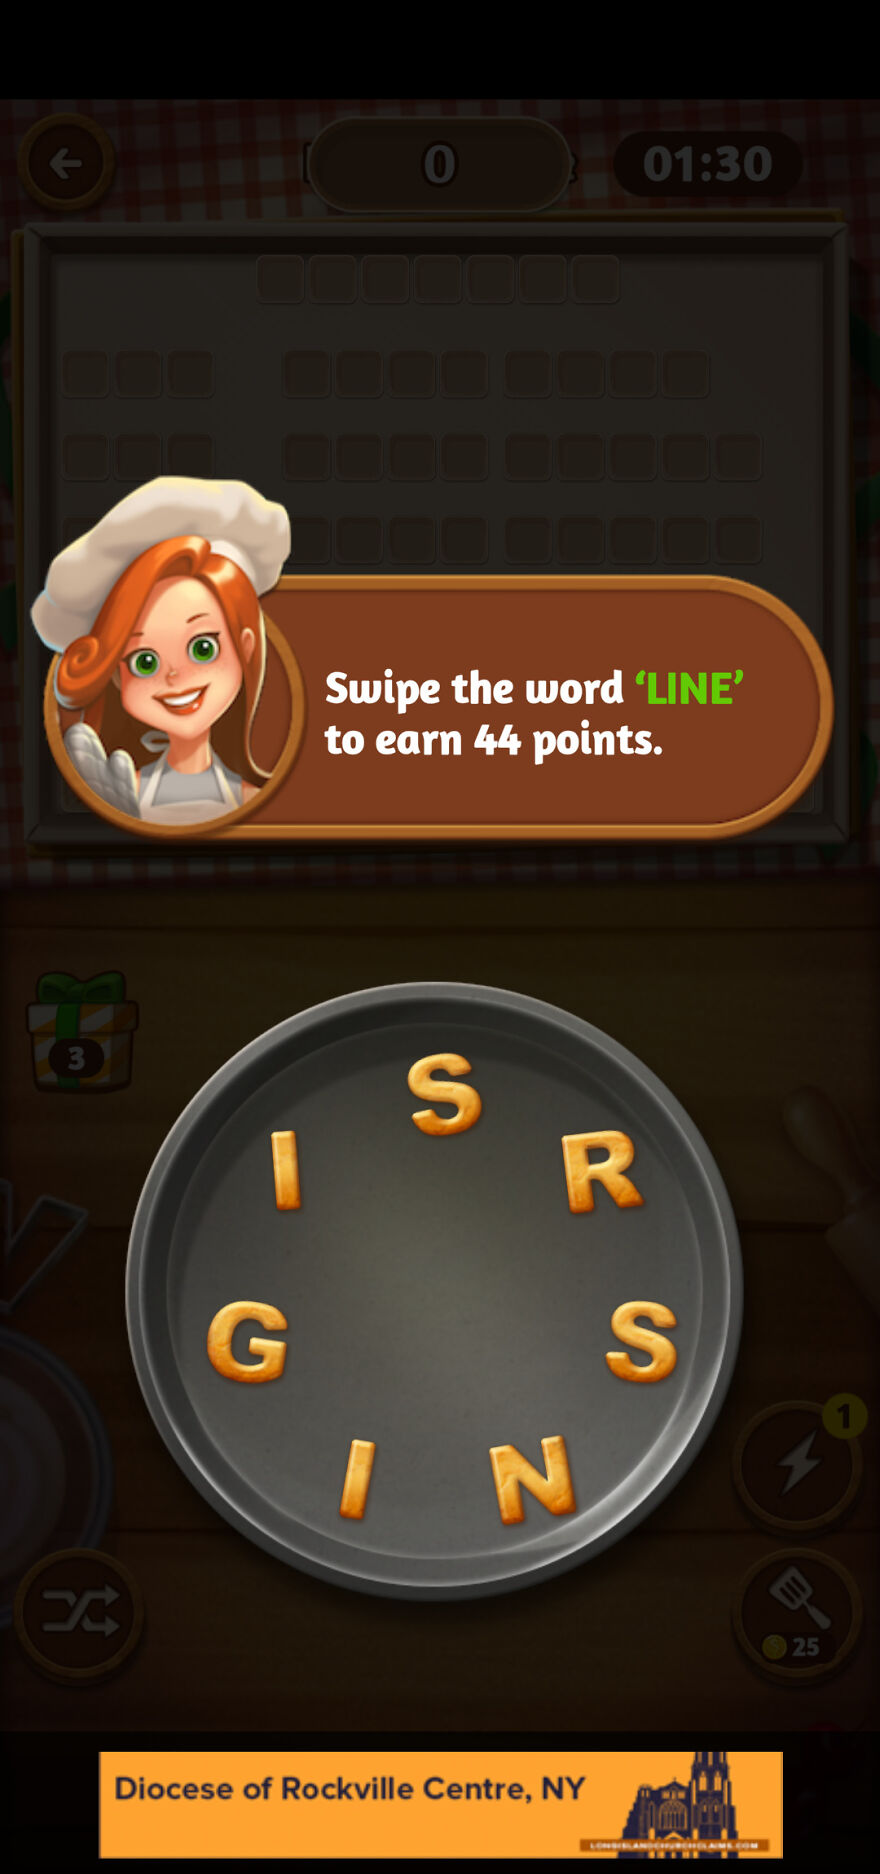 ...you Can't Spell "Line" With Those Letters